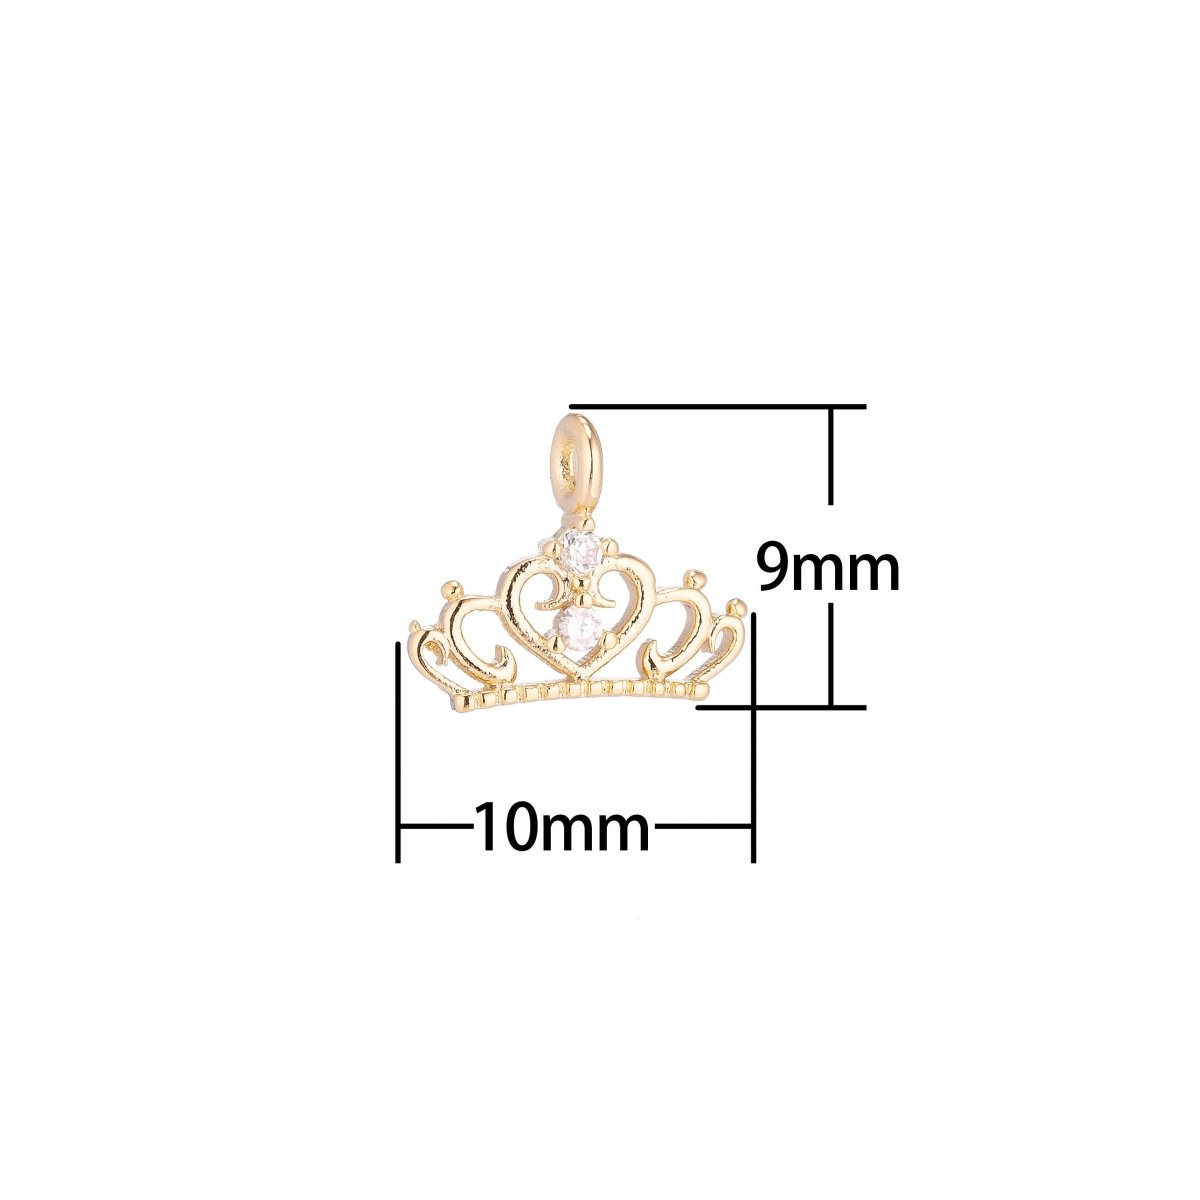 Dainty 18K Gold Filled Crown Tiara Queen Cubic Zirconia Necklace Pendant Bracelet Earring Charm for Jewelry MakingC-153 - DLUXCA